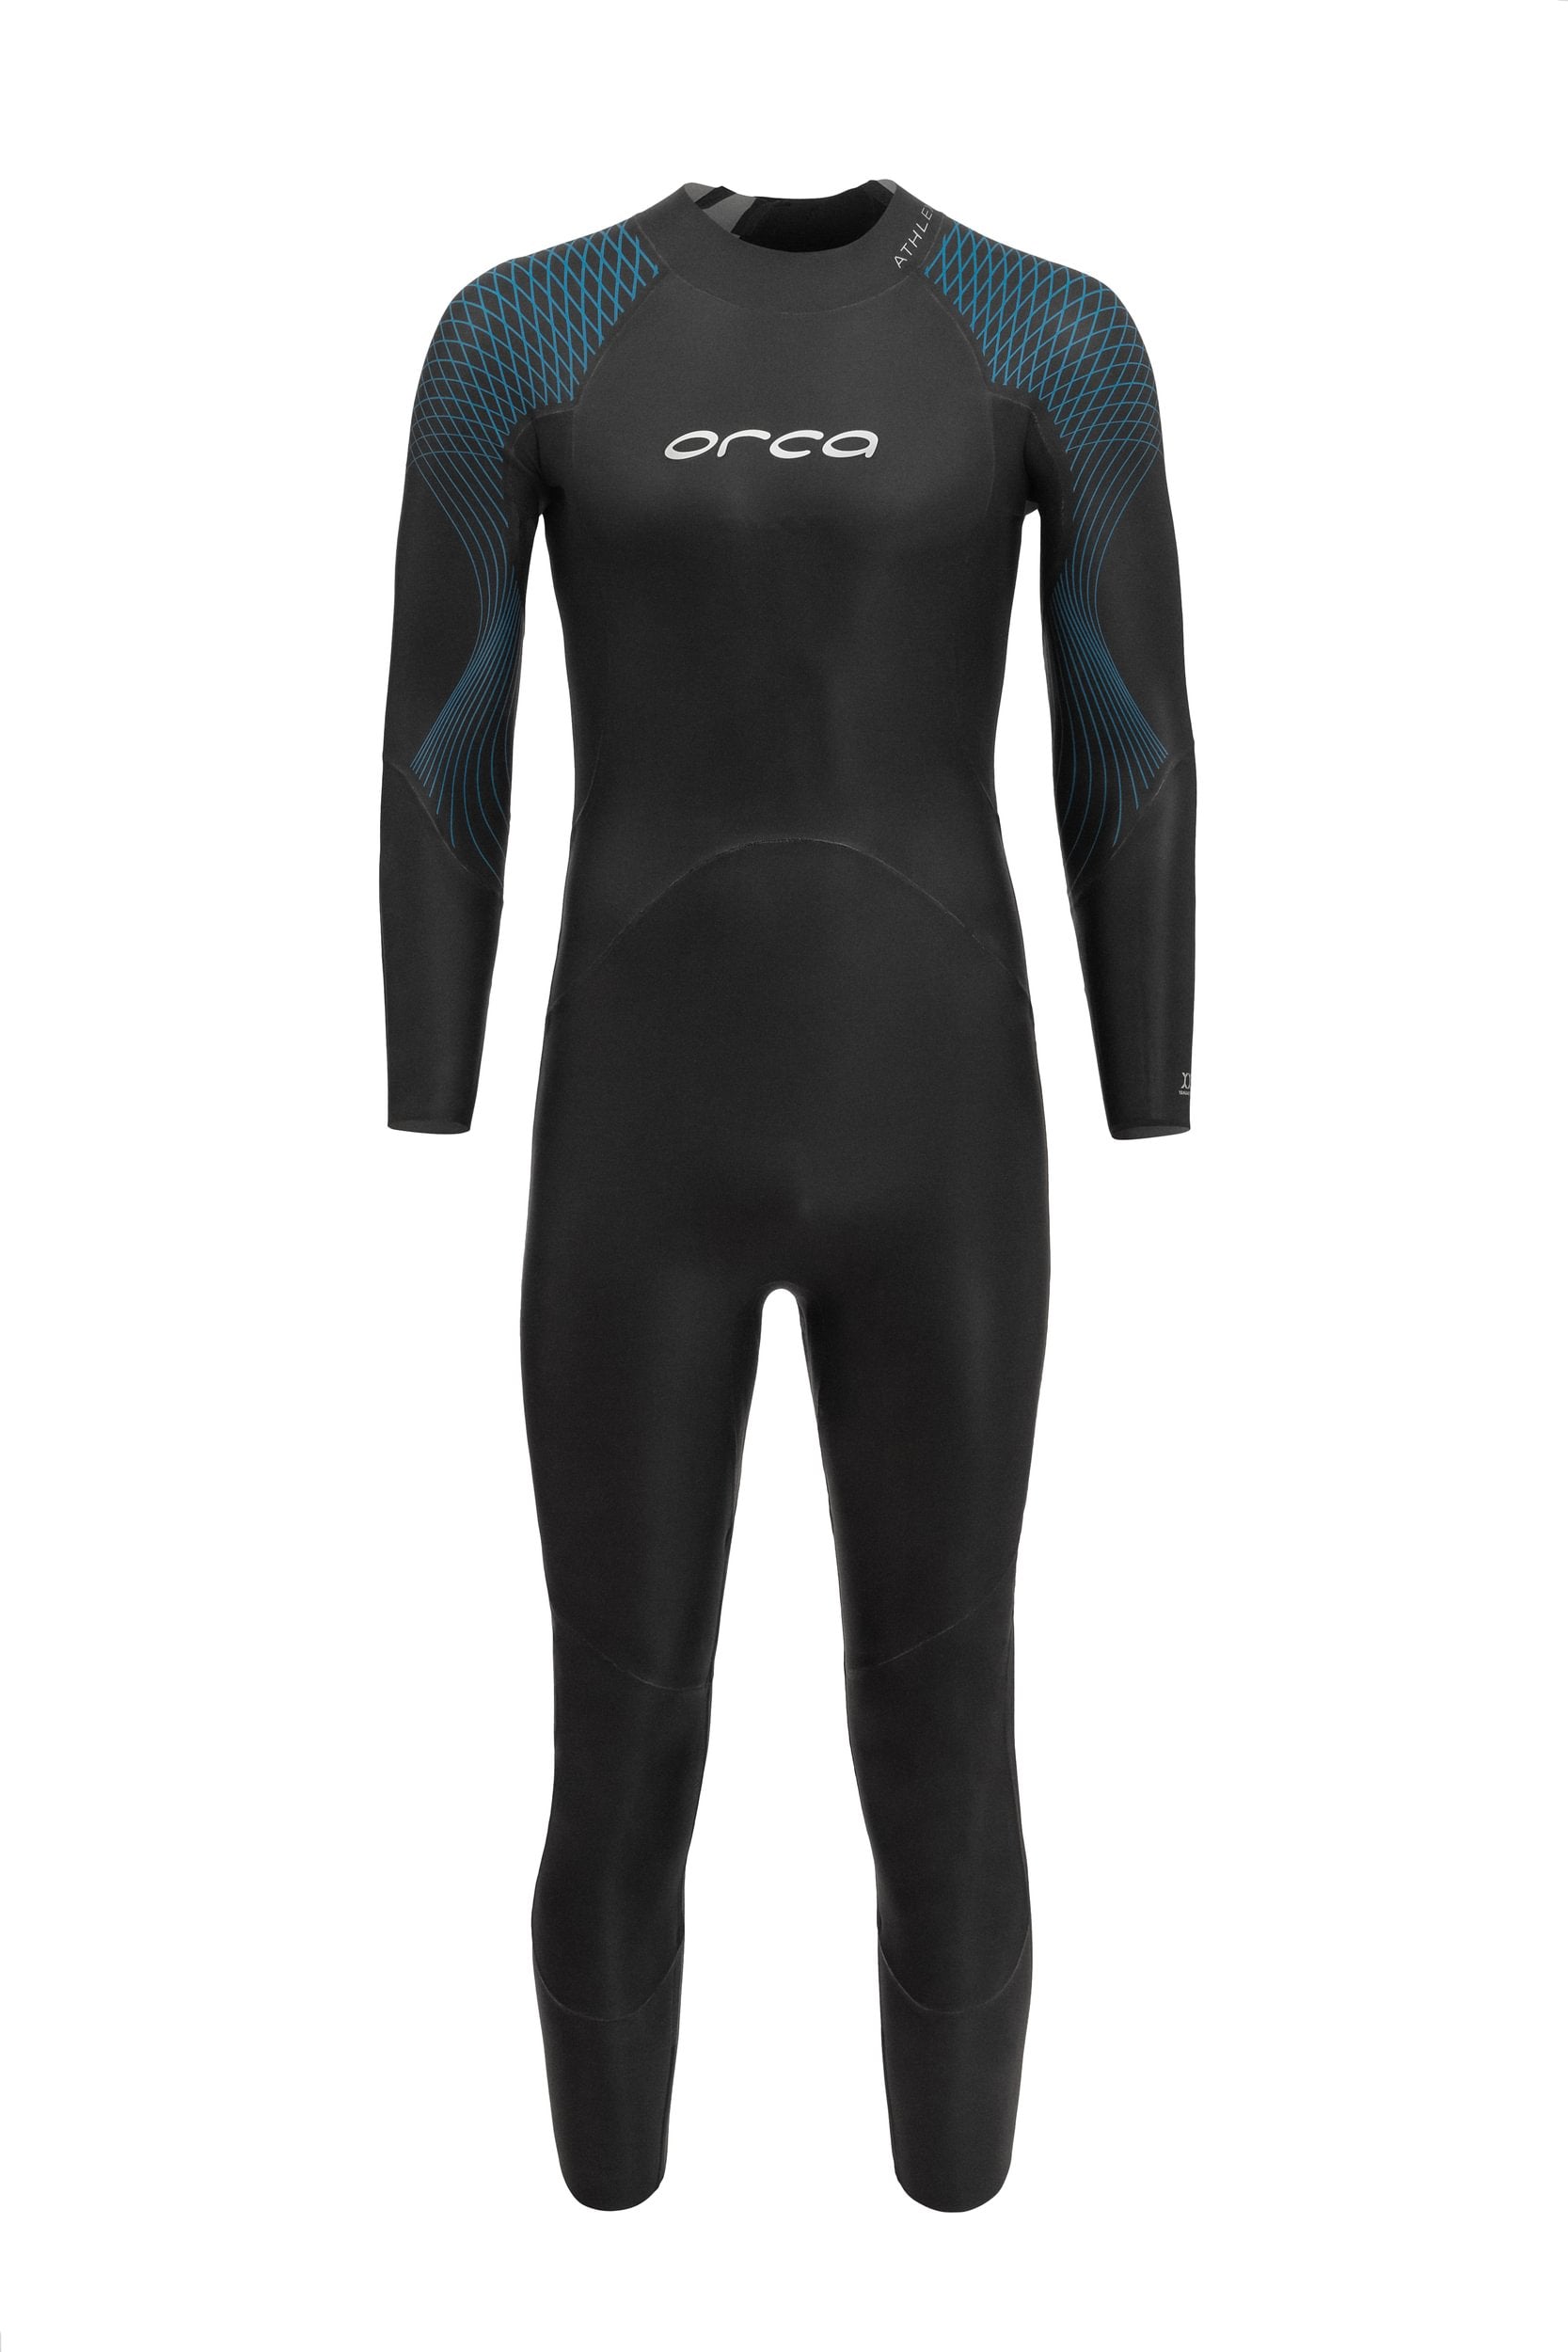 ORCA Athlex Flex 2024 Wetsuit - Male (Formally the Orca Equip)